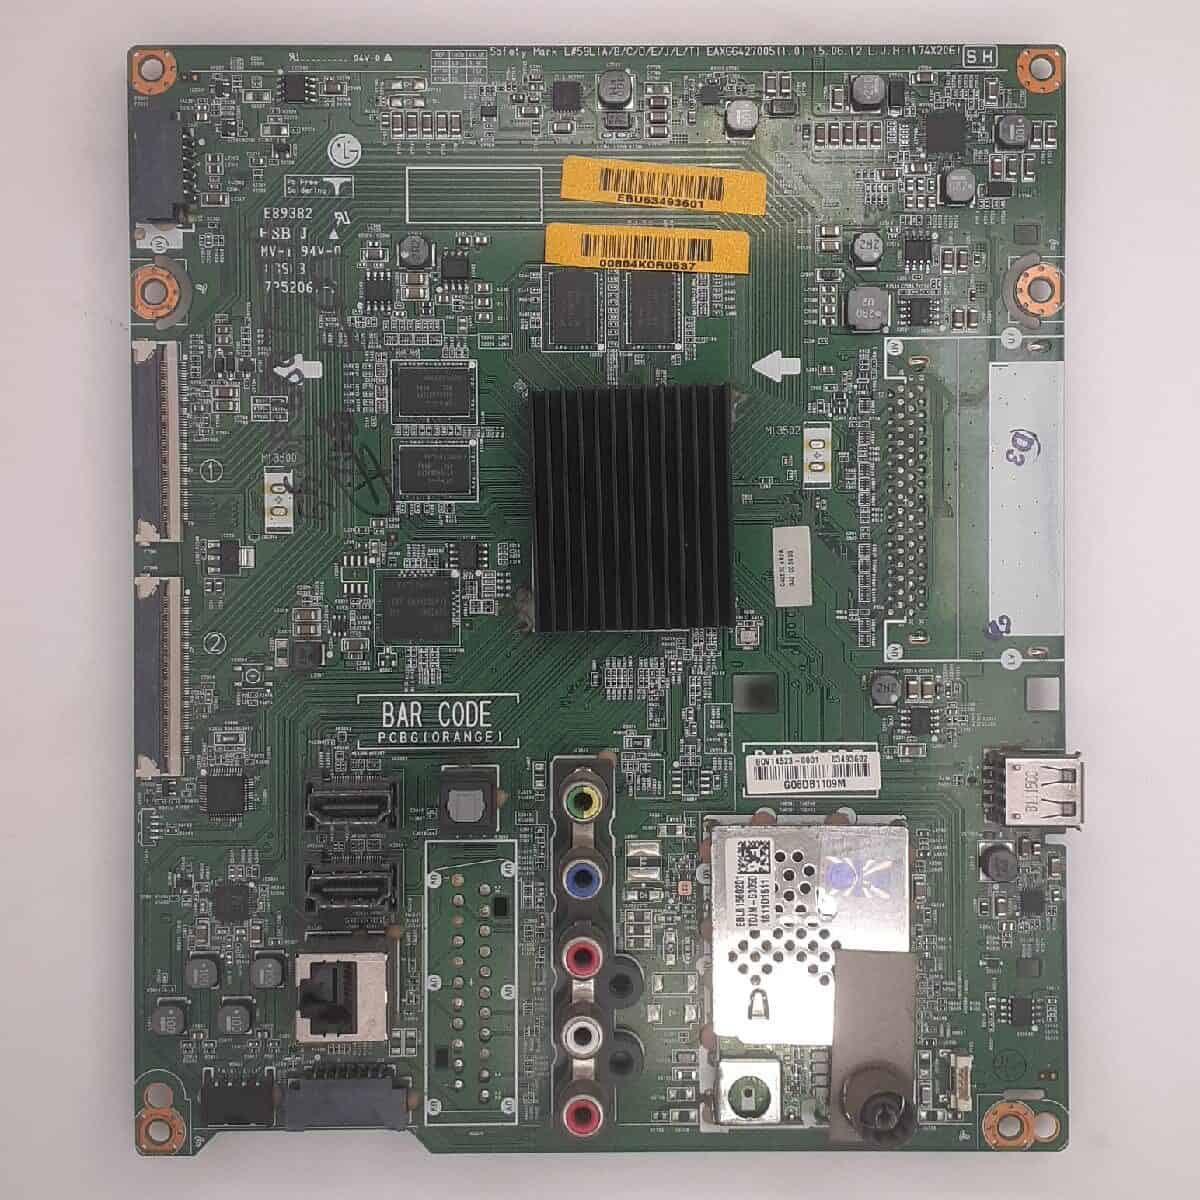 55UF680T-TA LG MOTHERBOARD FOR LED TV